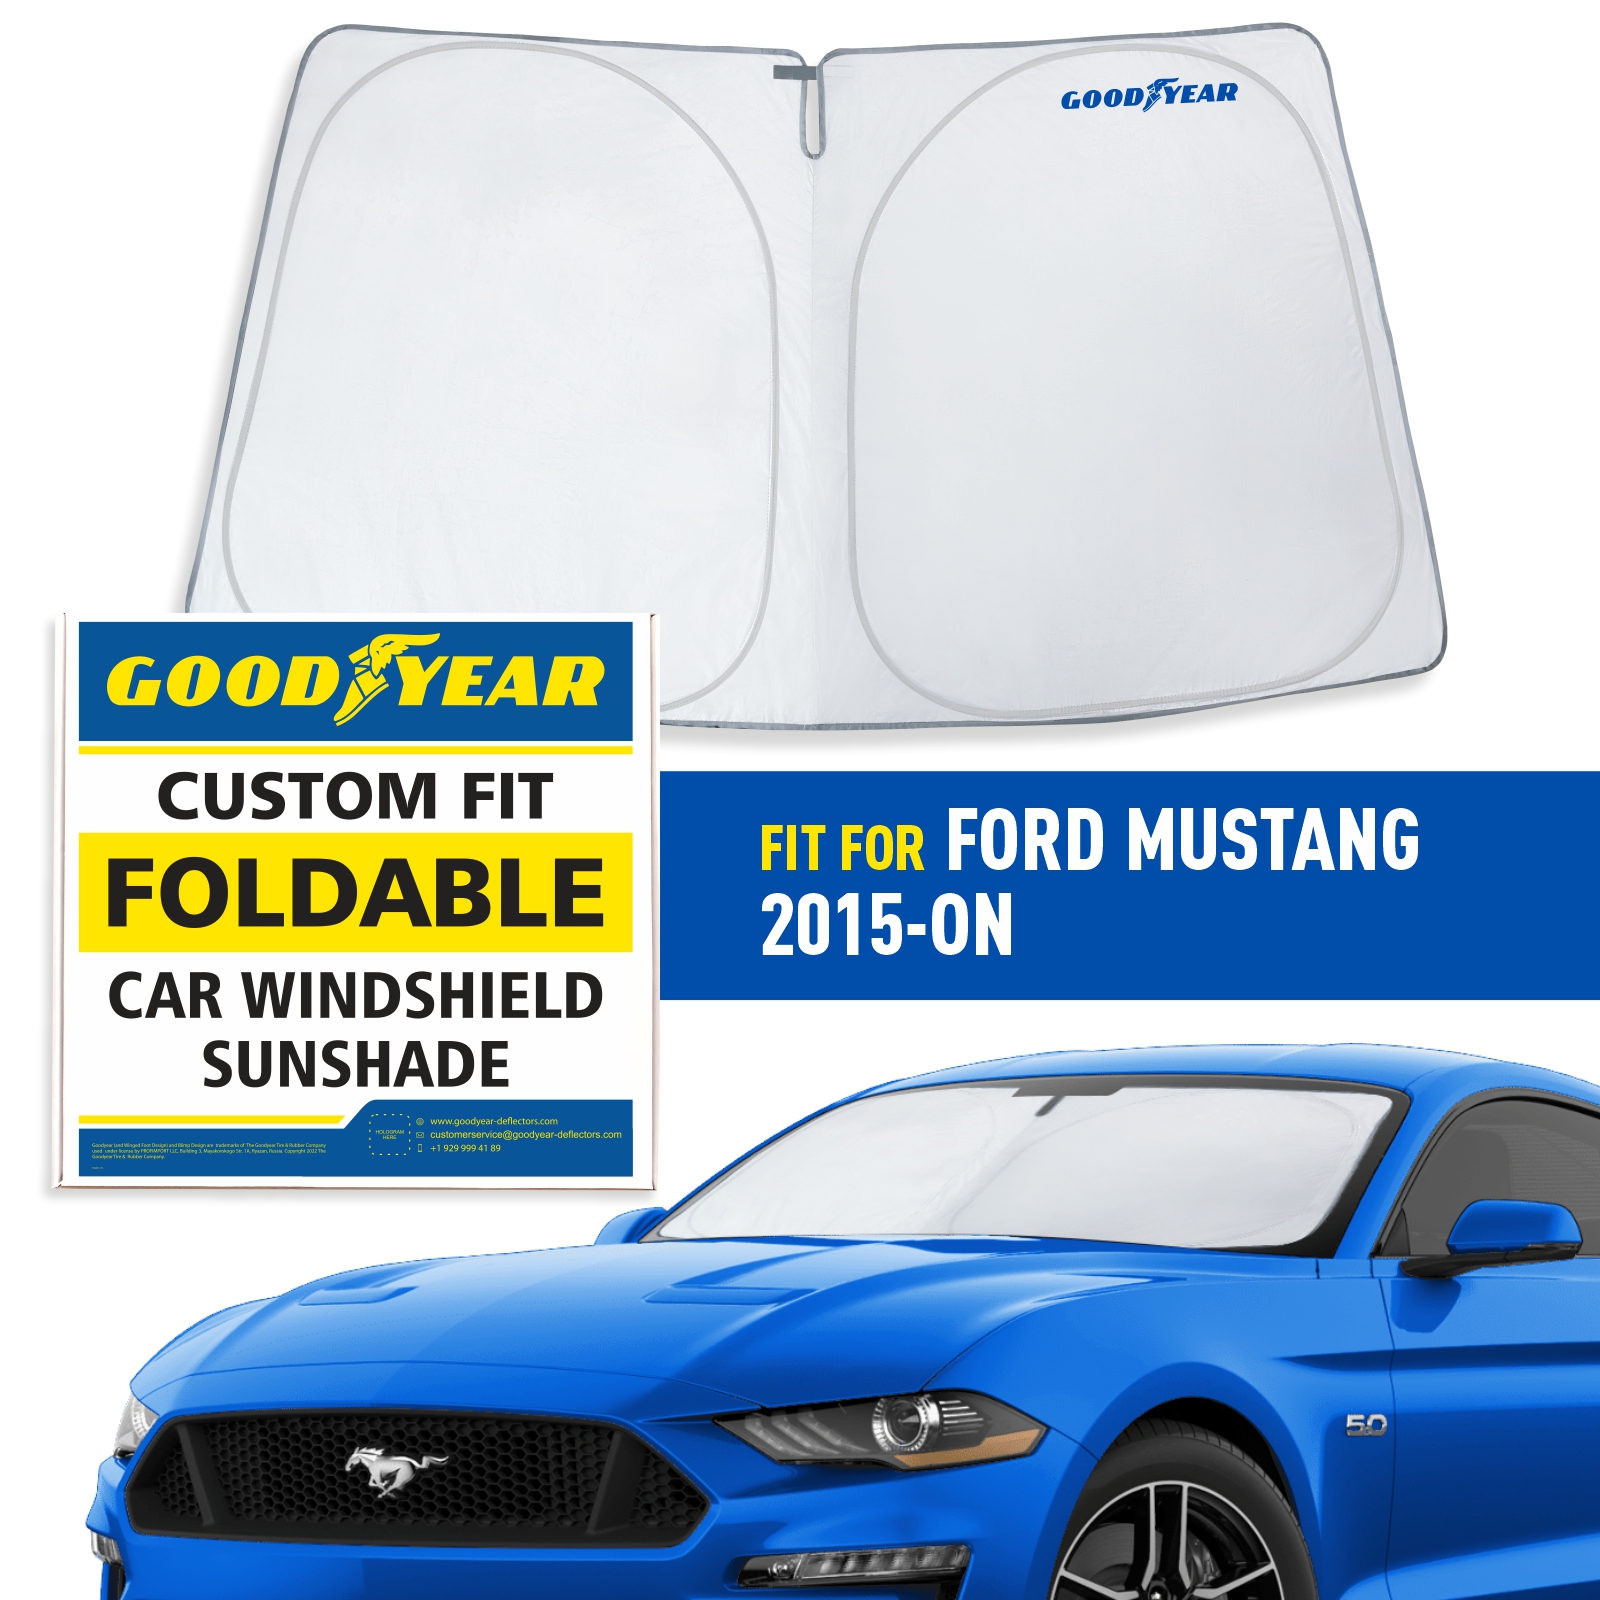 Goodyear Foldable Windshield Sun Shade for Ford Mustang 2015-2023, Custom-Fit Car Windshield Cover,Car Sunshade,UV Protection,Vehicle Sun Protector,Auto Car Window Shades for Front Window - GY008290 - image 1 of 7